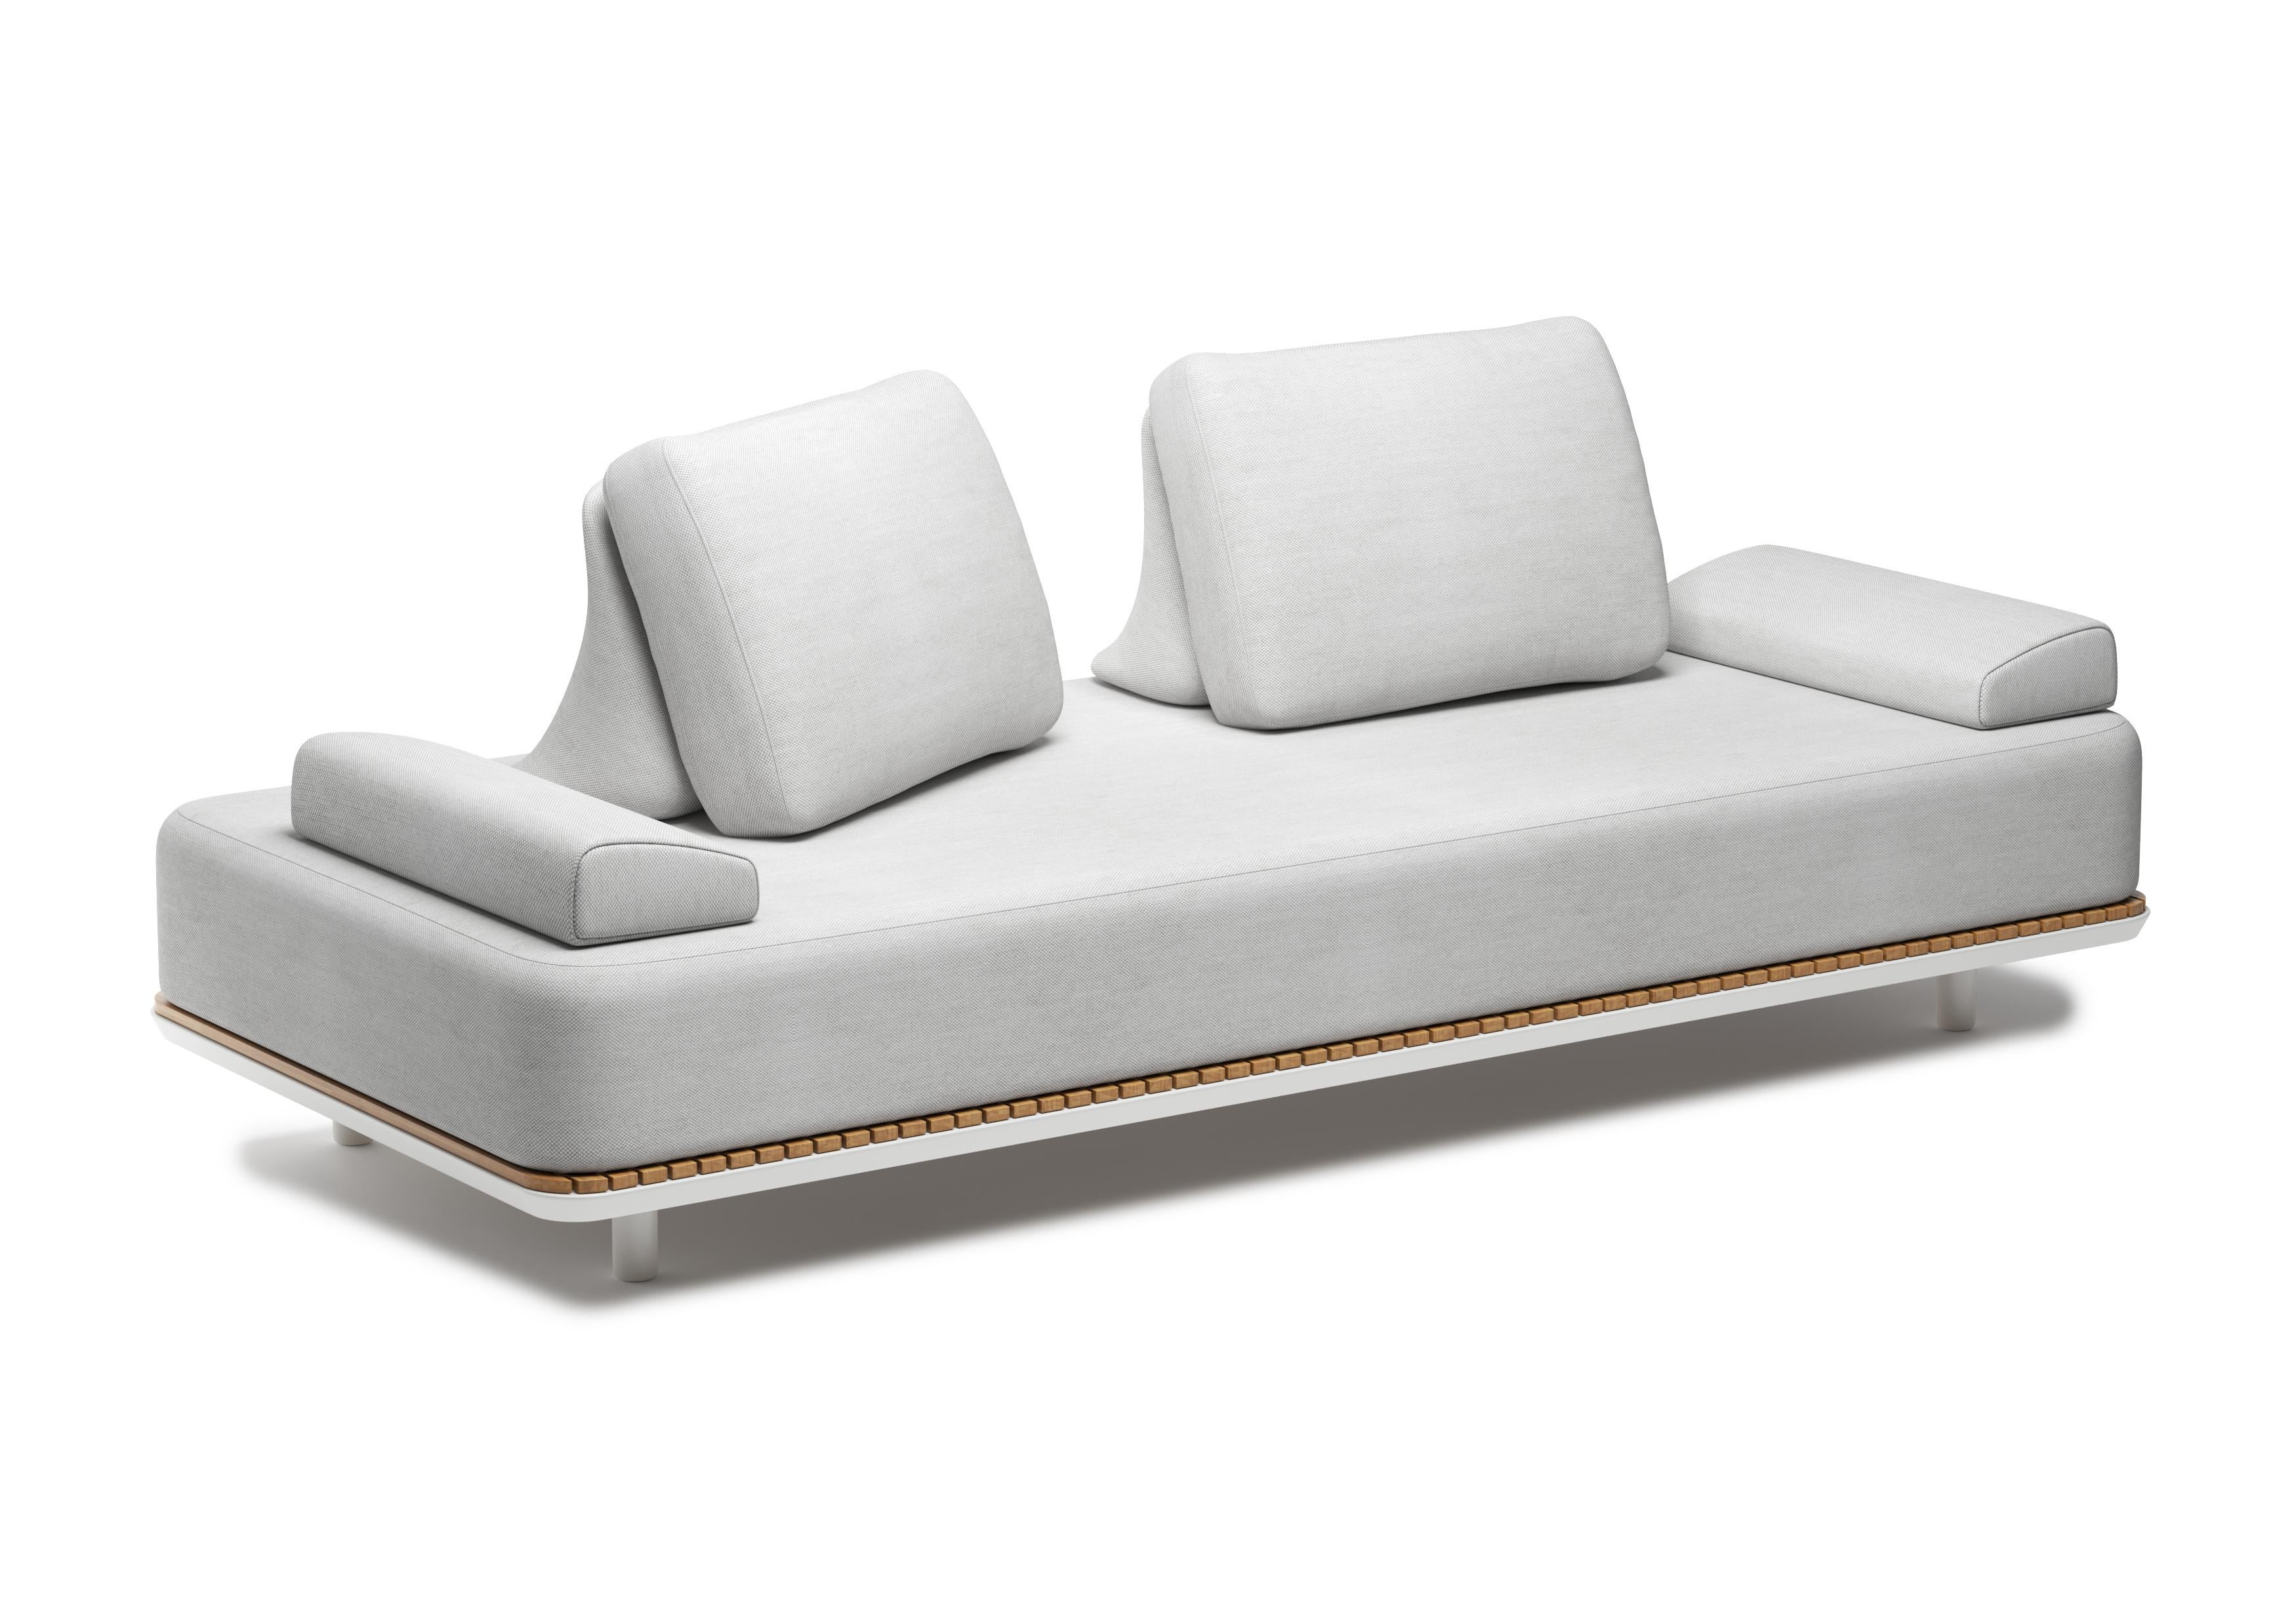 Hand-Crafted Morgan Coconut Sofa by Snoc